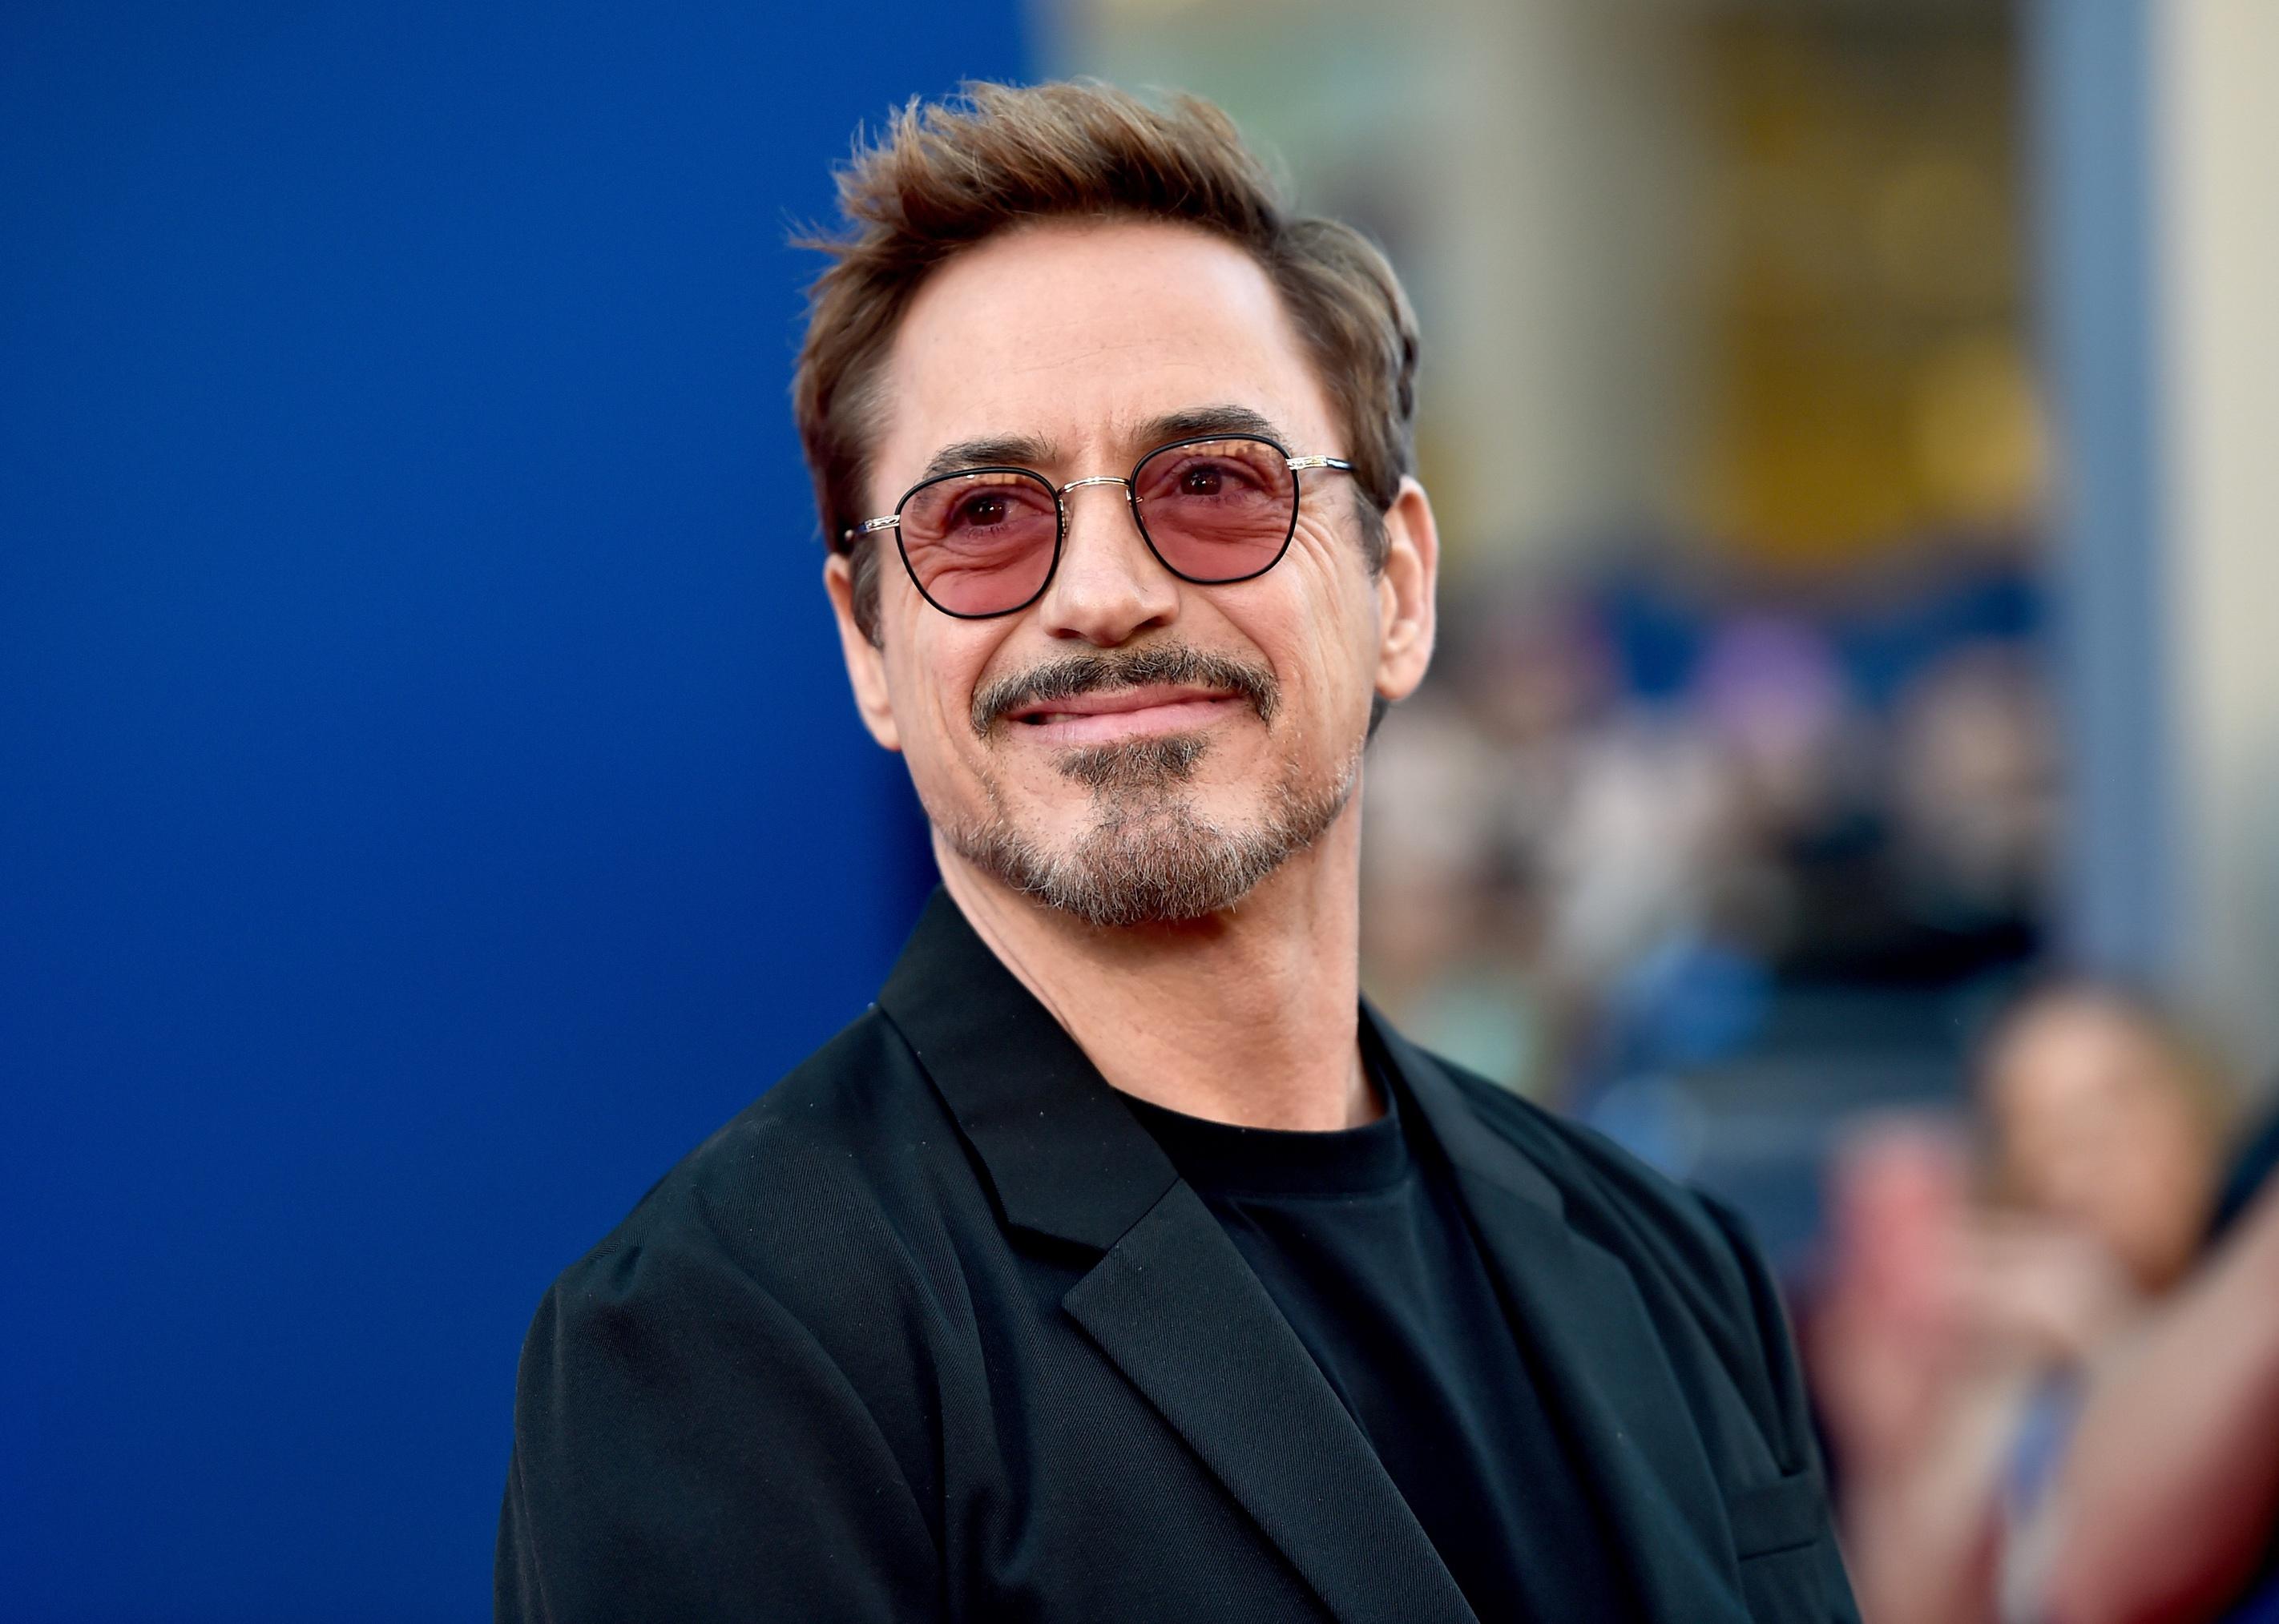 Robert Downey Jr. attends the premiere of Columbia Pictures